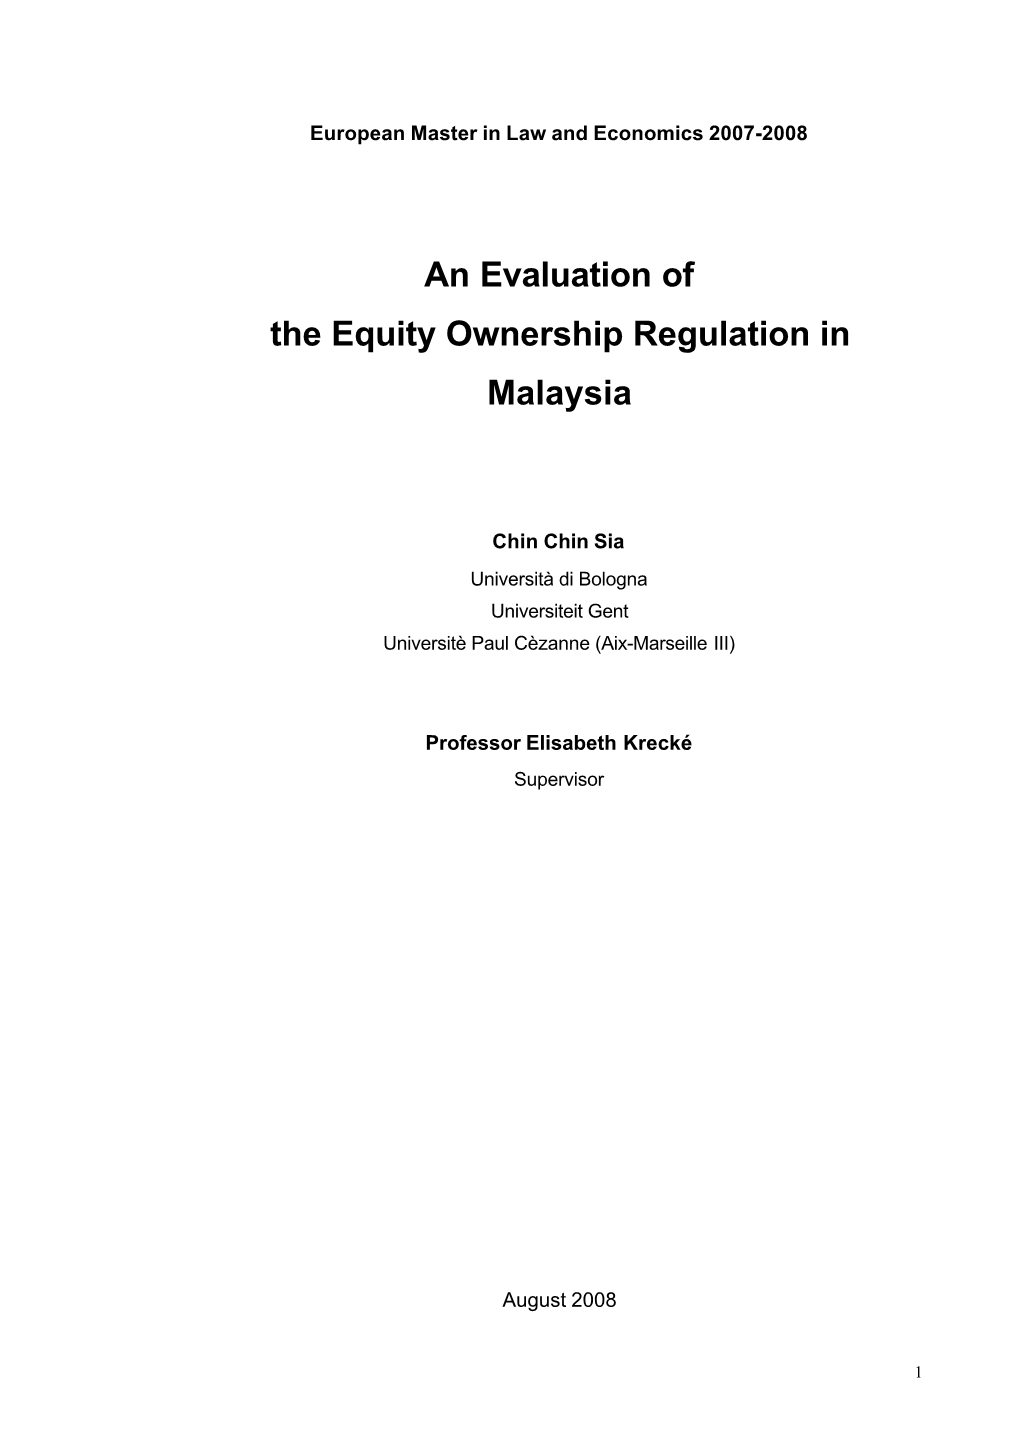 An Evaluation of the Equity Ownership Regulation in Malaysia